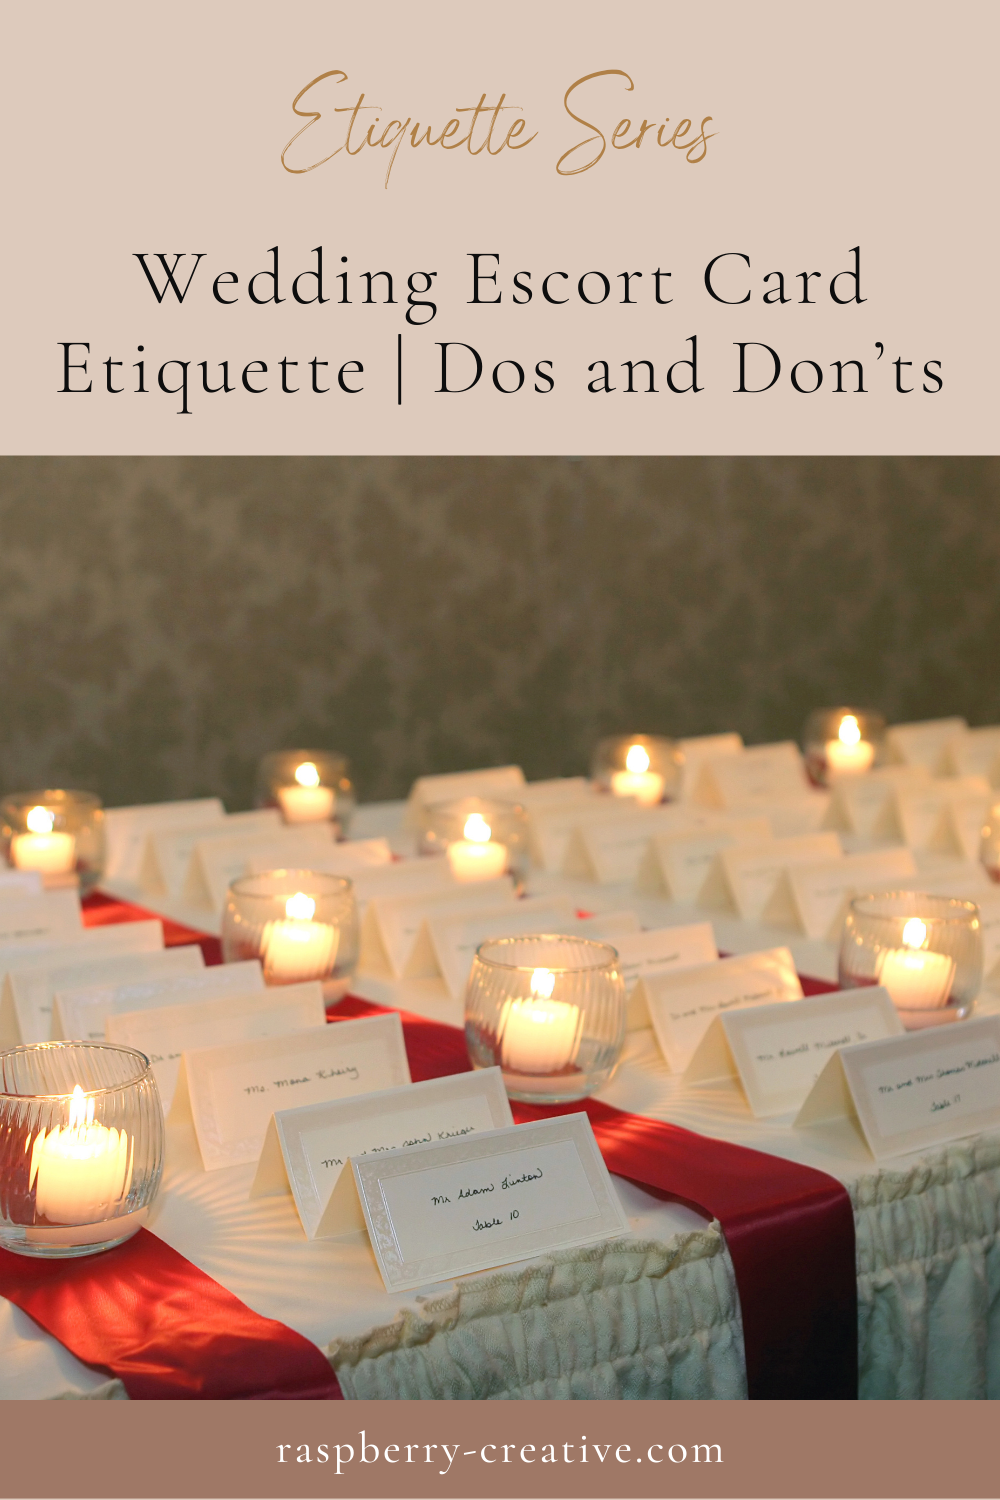 etiquette series dos and don'ts of wedding escort cards